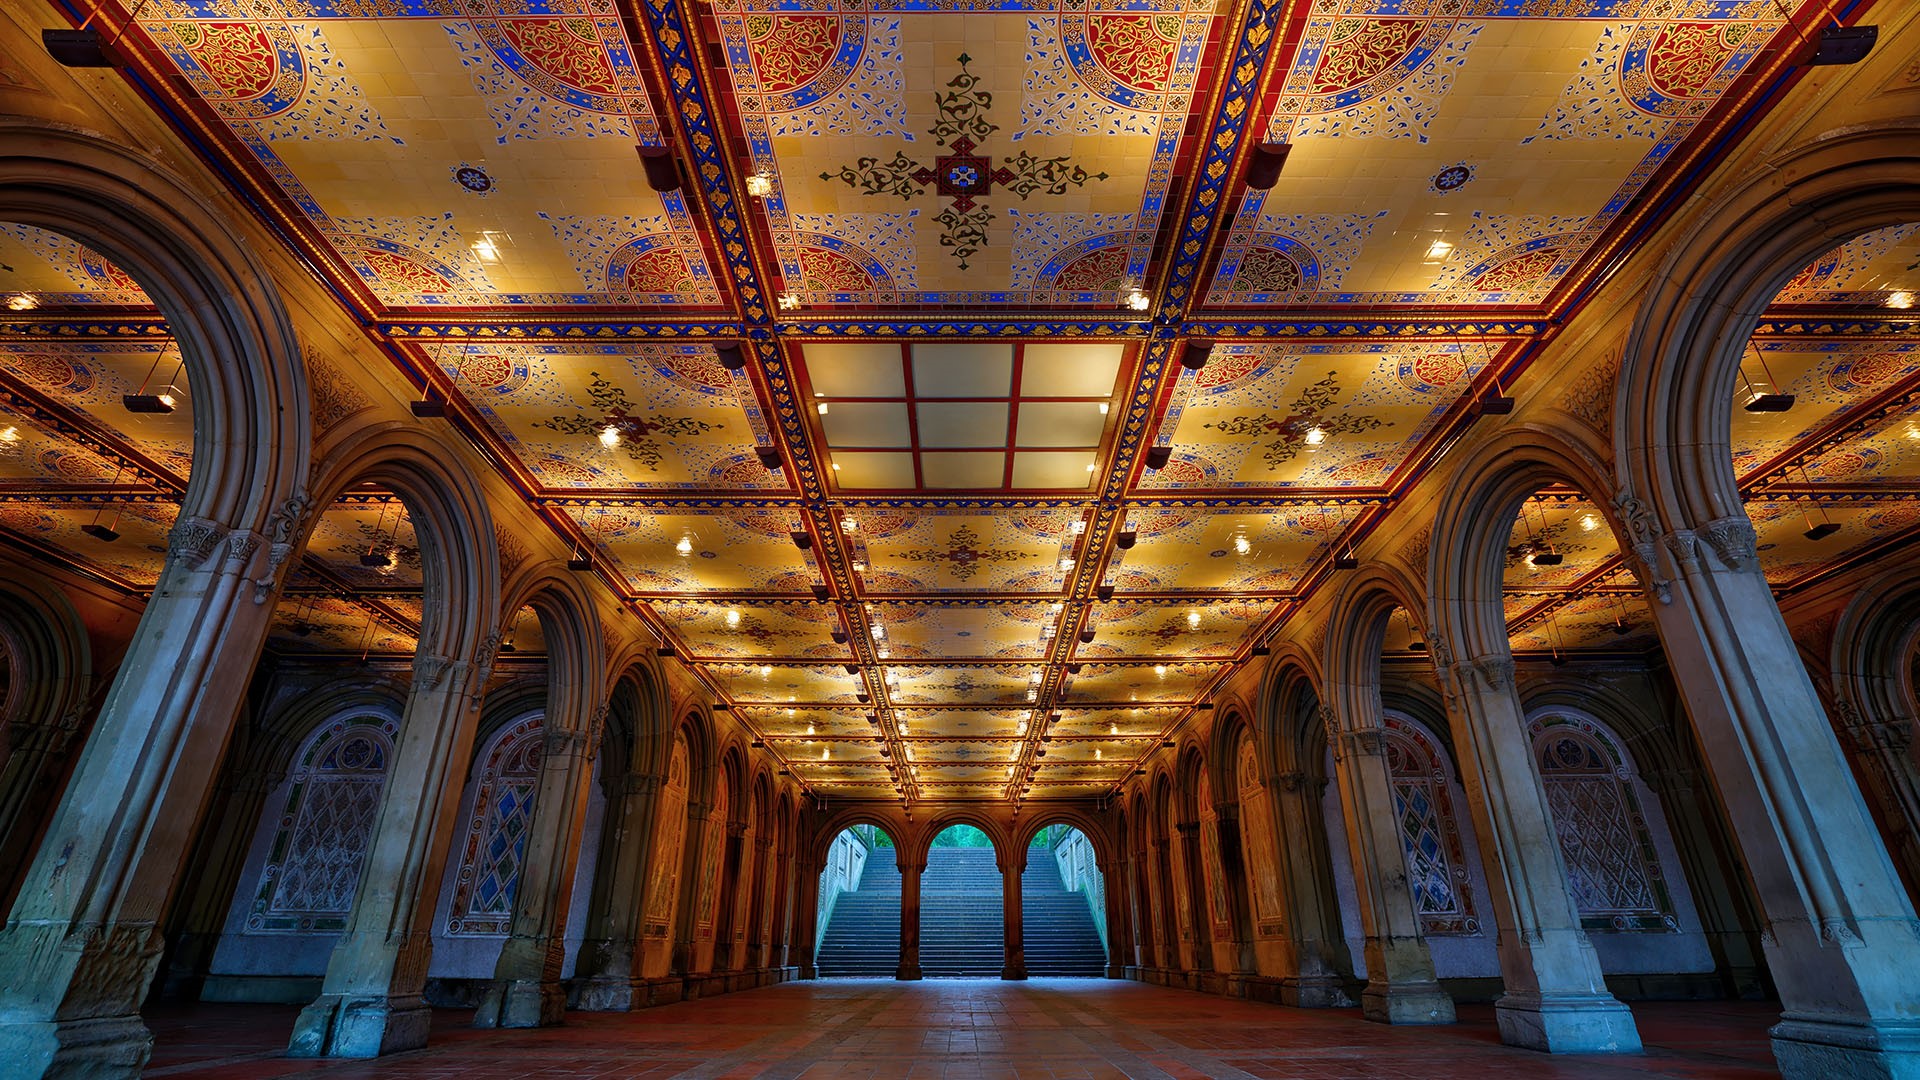 Bethesda Terrace in Central Park